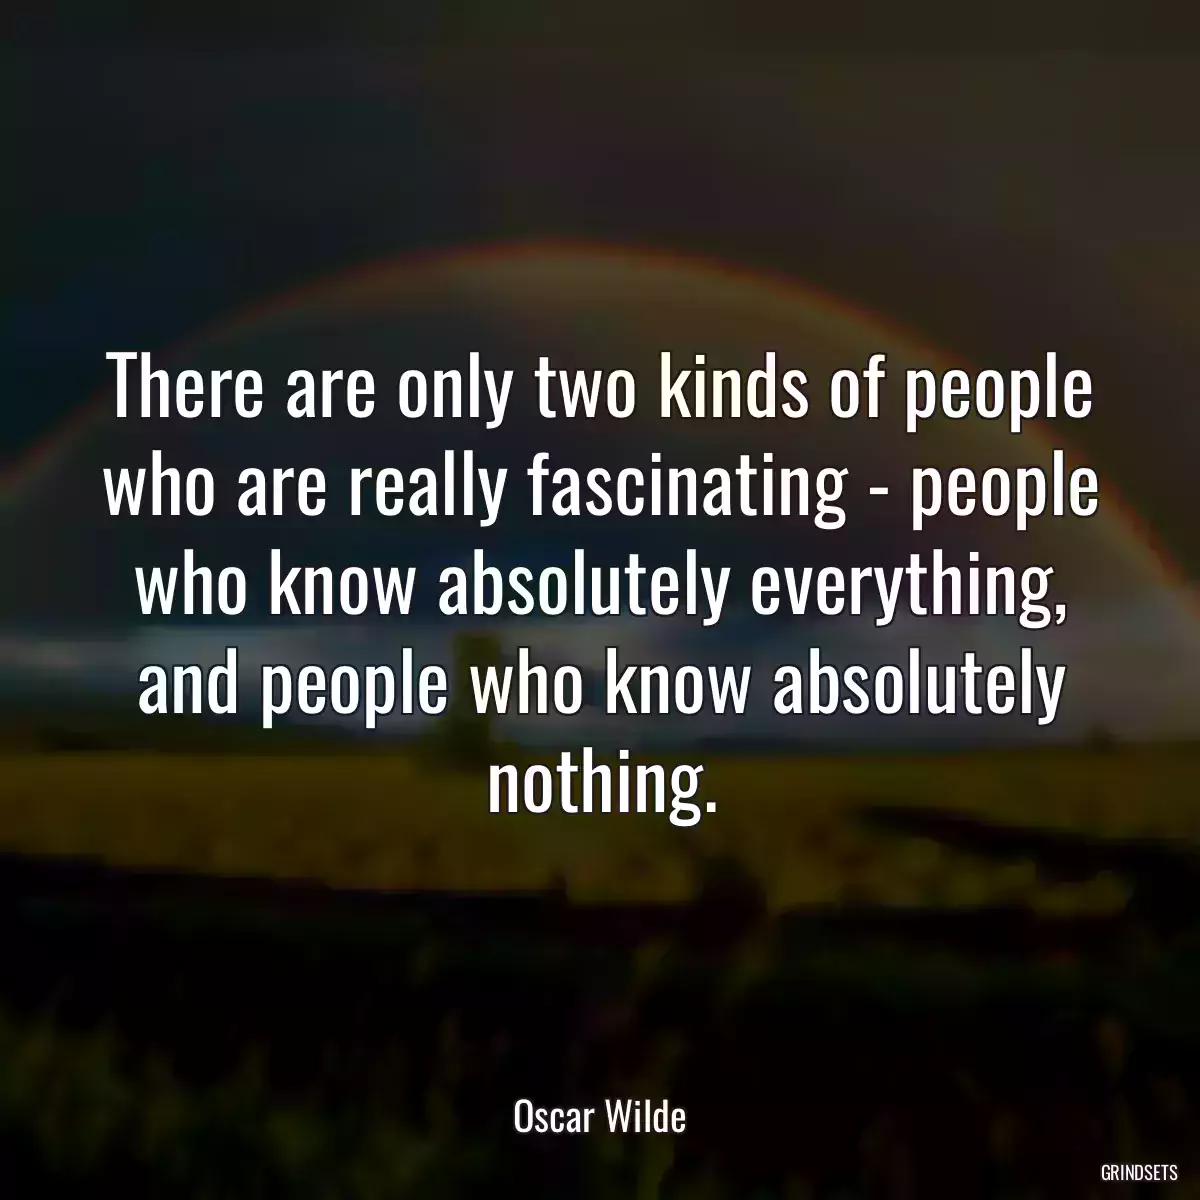 There are only two kinds of people who are really fascinating - people who know absolutely everything, and people who know absolutely nothing.